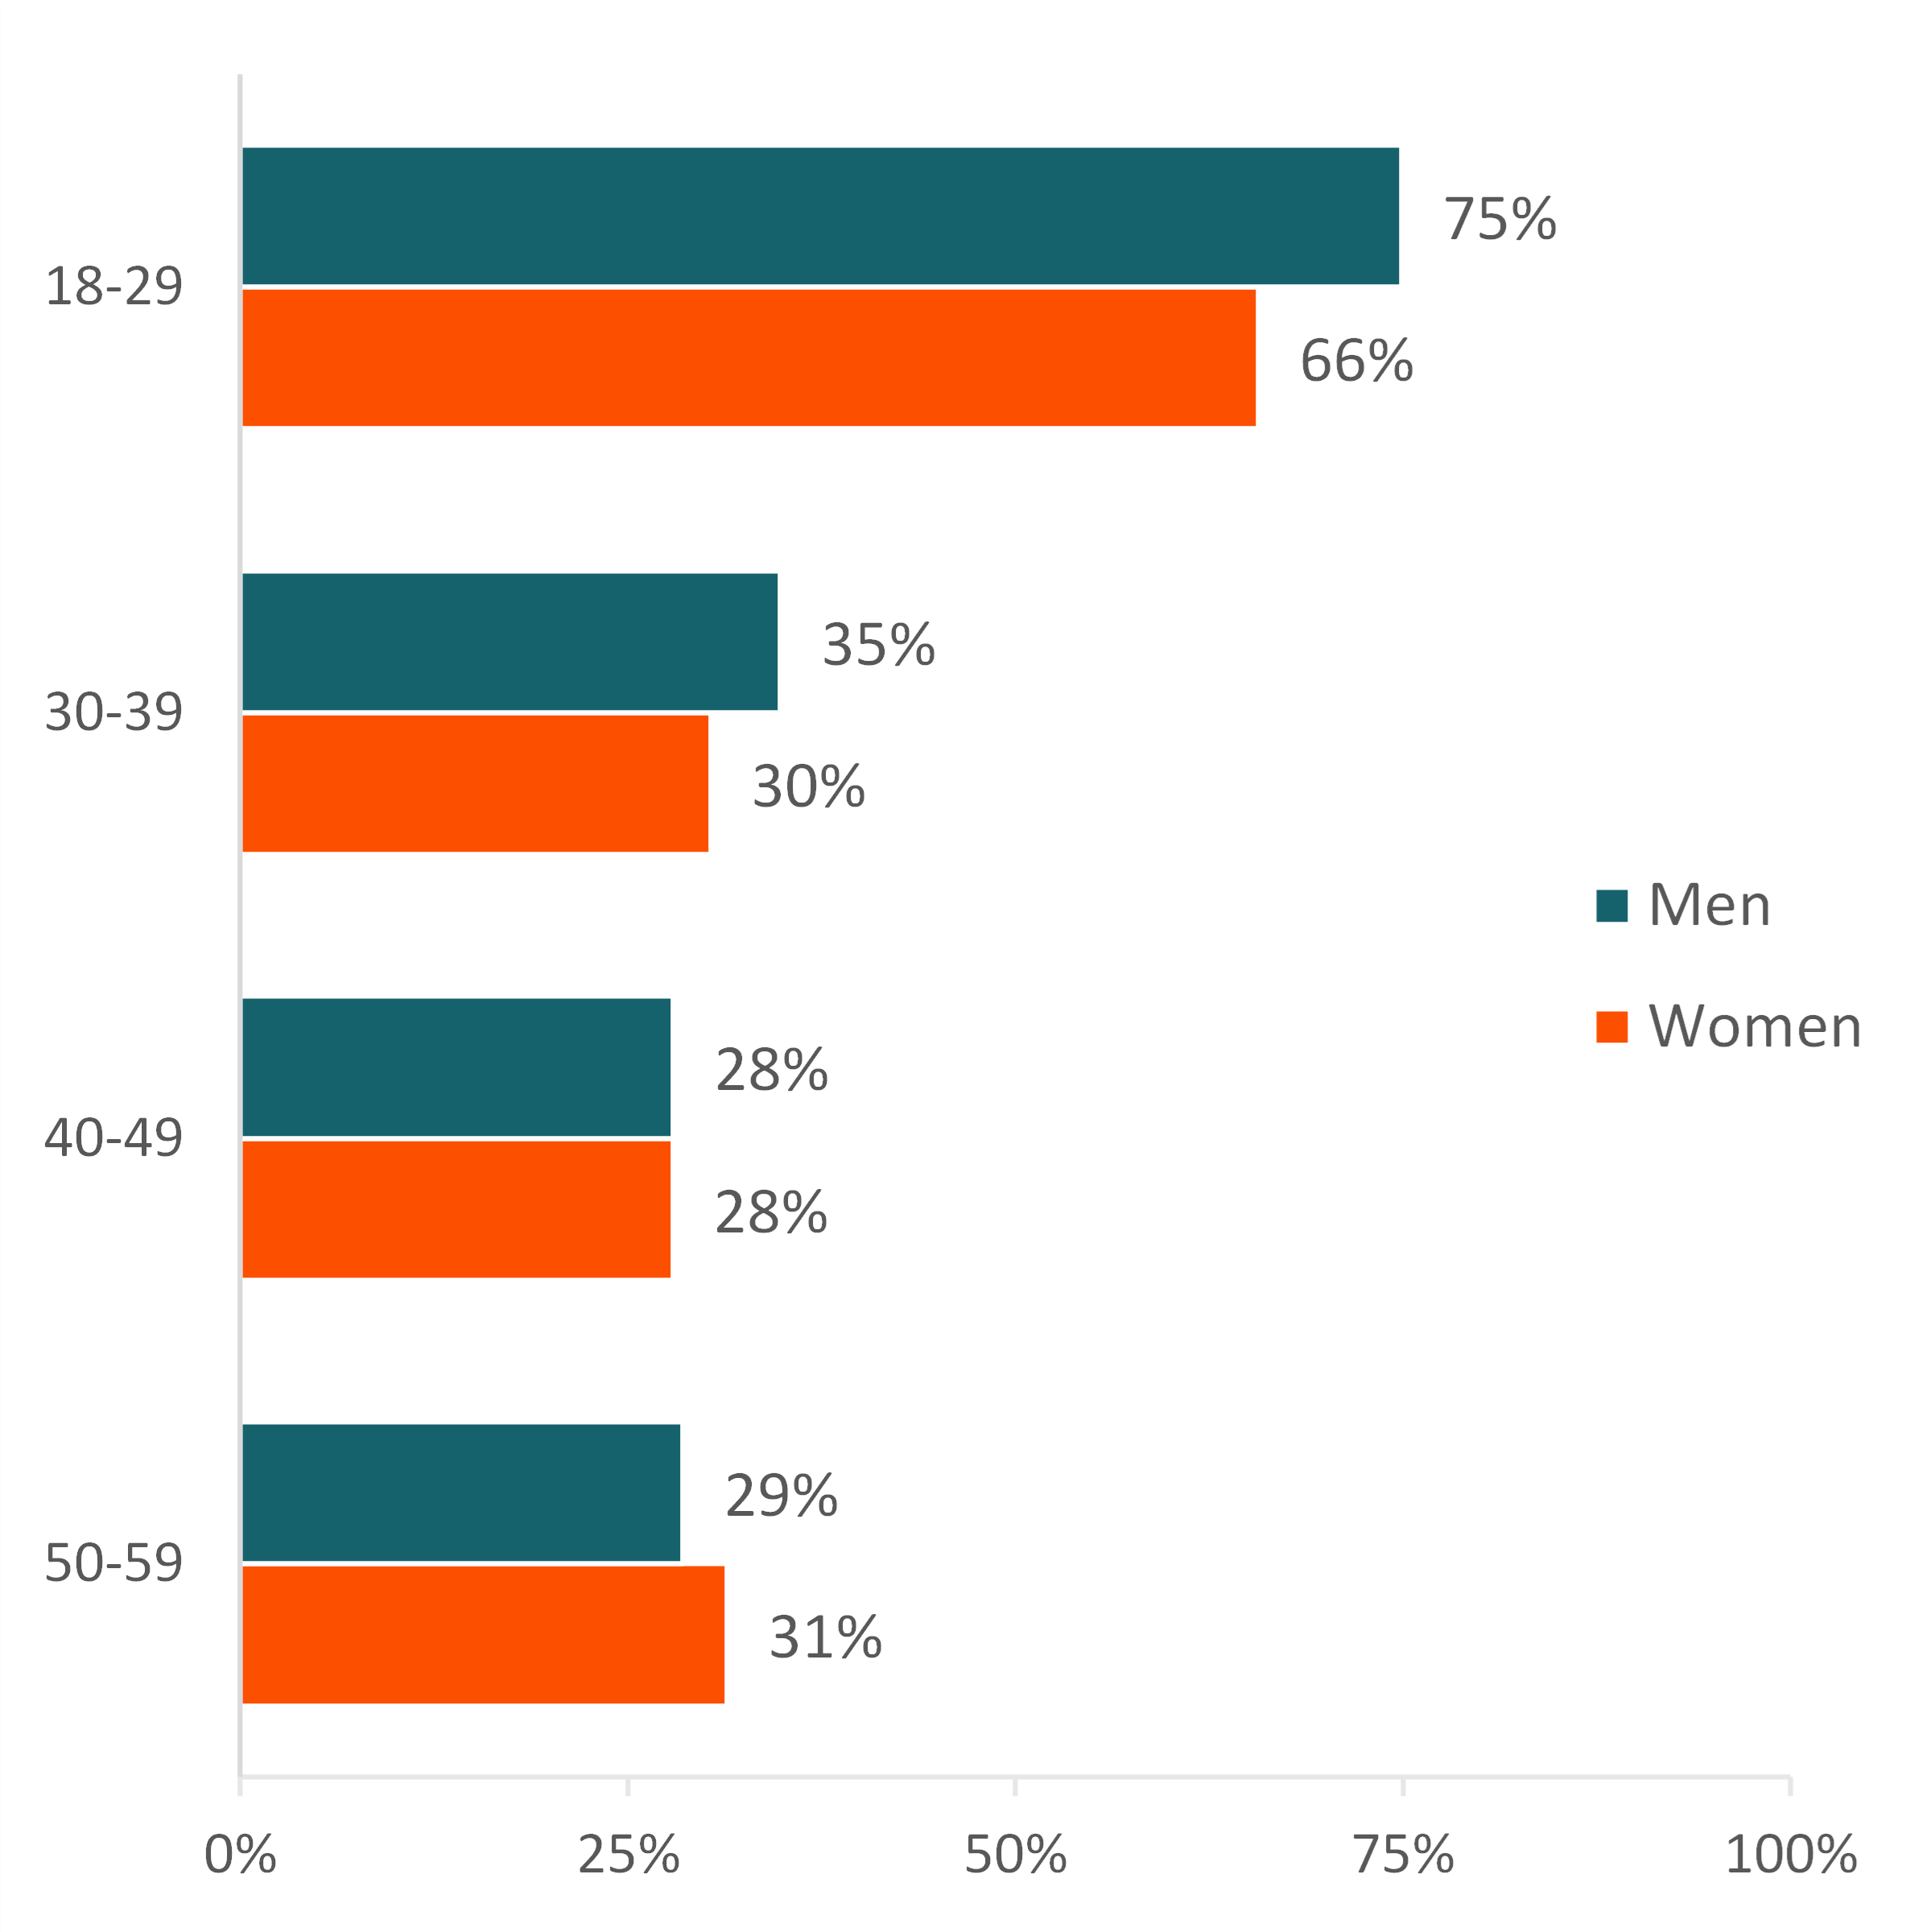 graph showing Figure 1. Share of Single Individuals, by Age Group and Gender, 2022